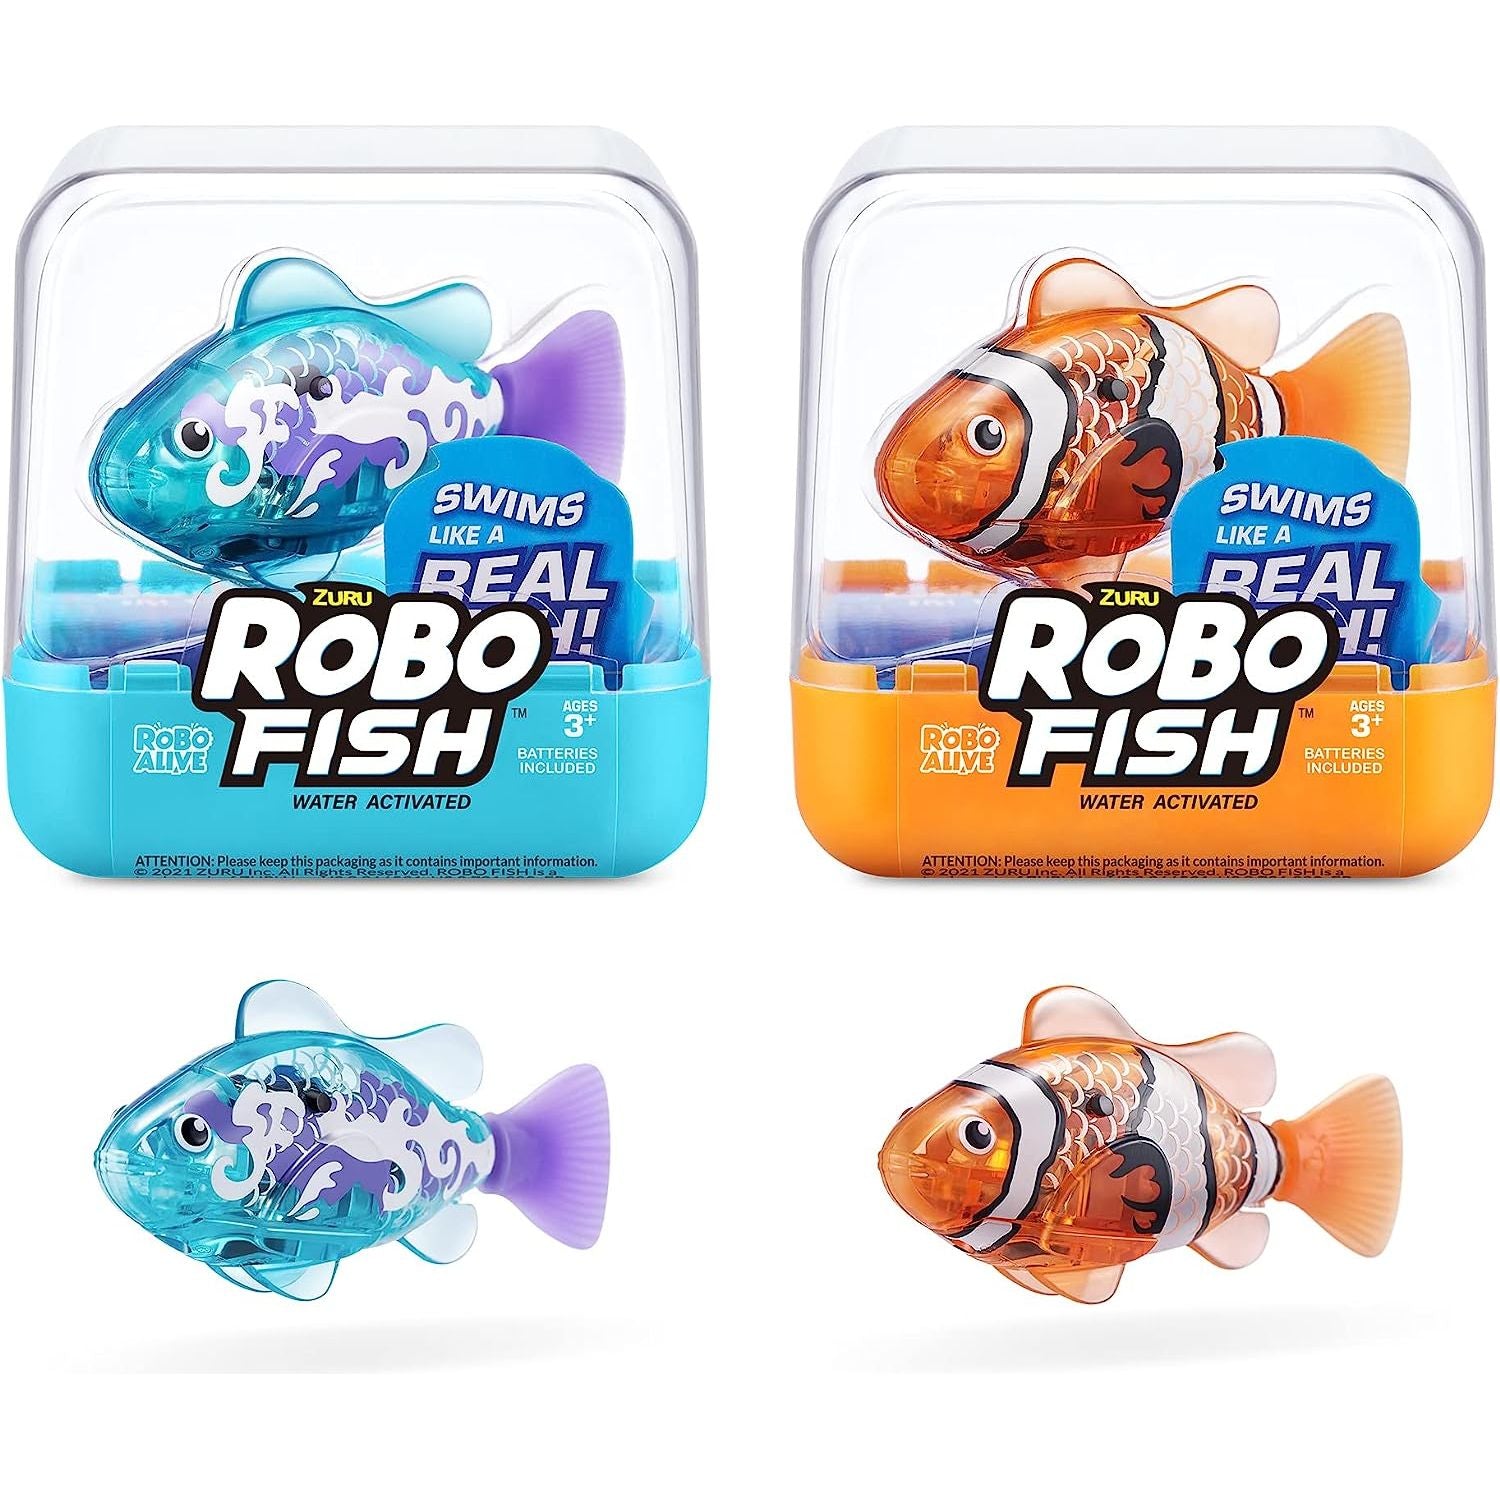 Robo Alive Robo Fish Robotic Swimming Fish Teal by ZURU Water Activated, Changes Color, Comes with Batteries - Series 3